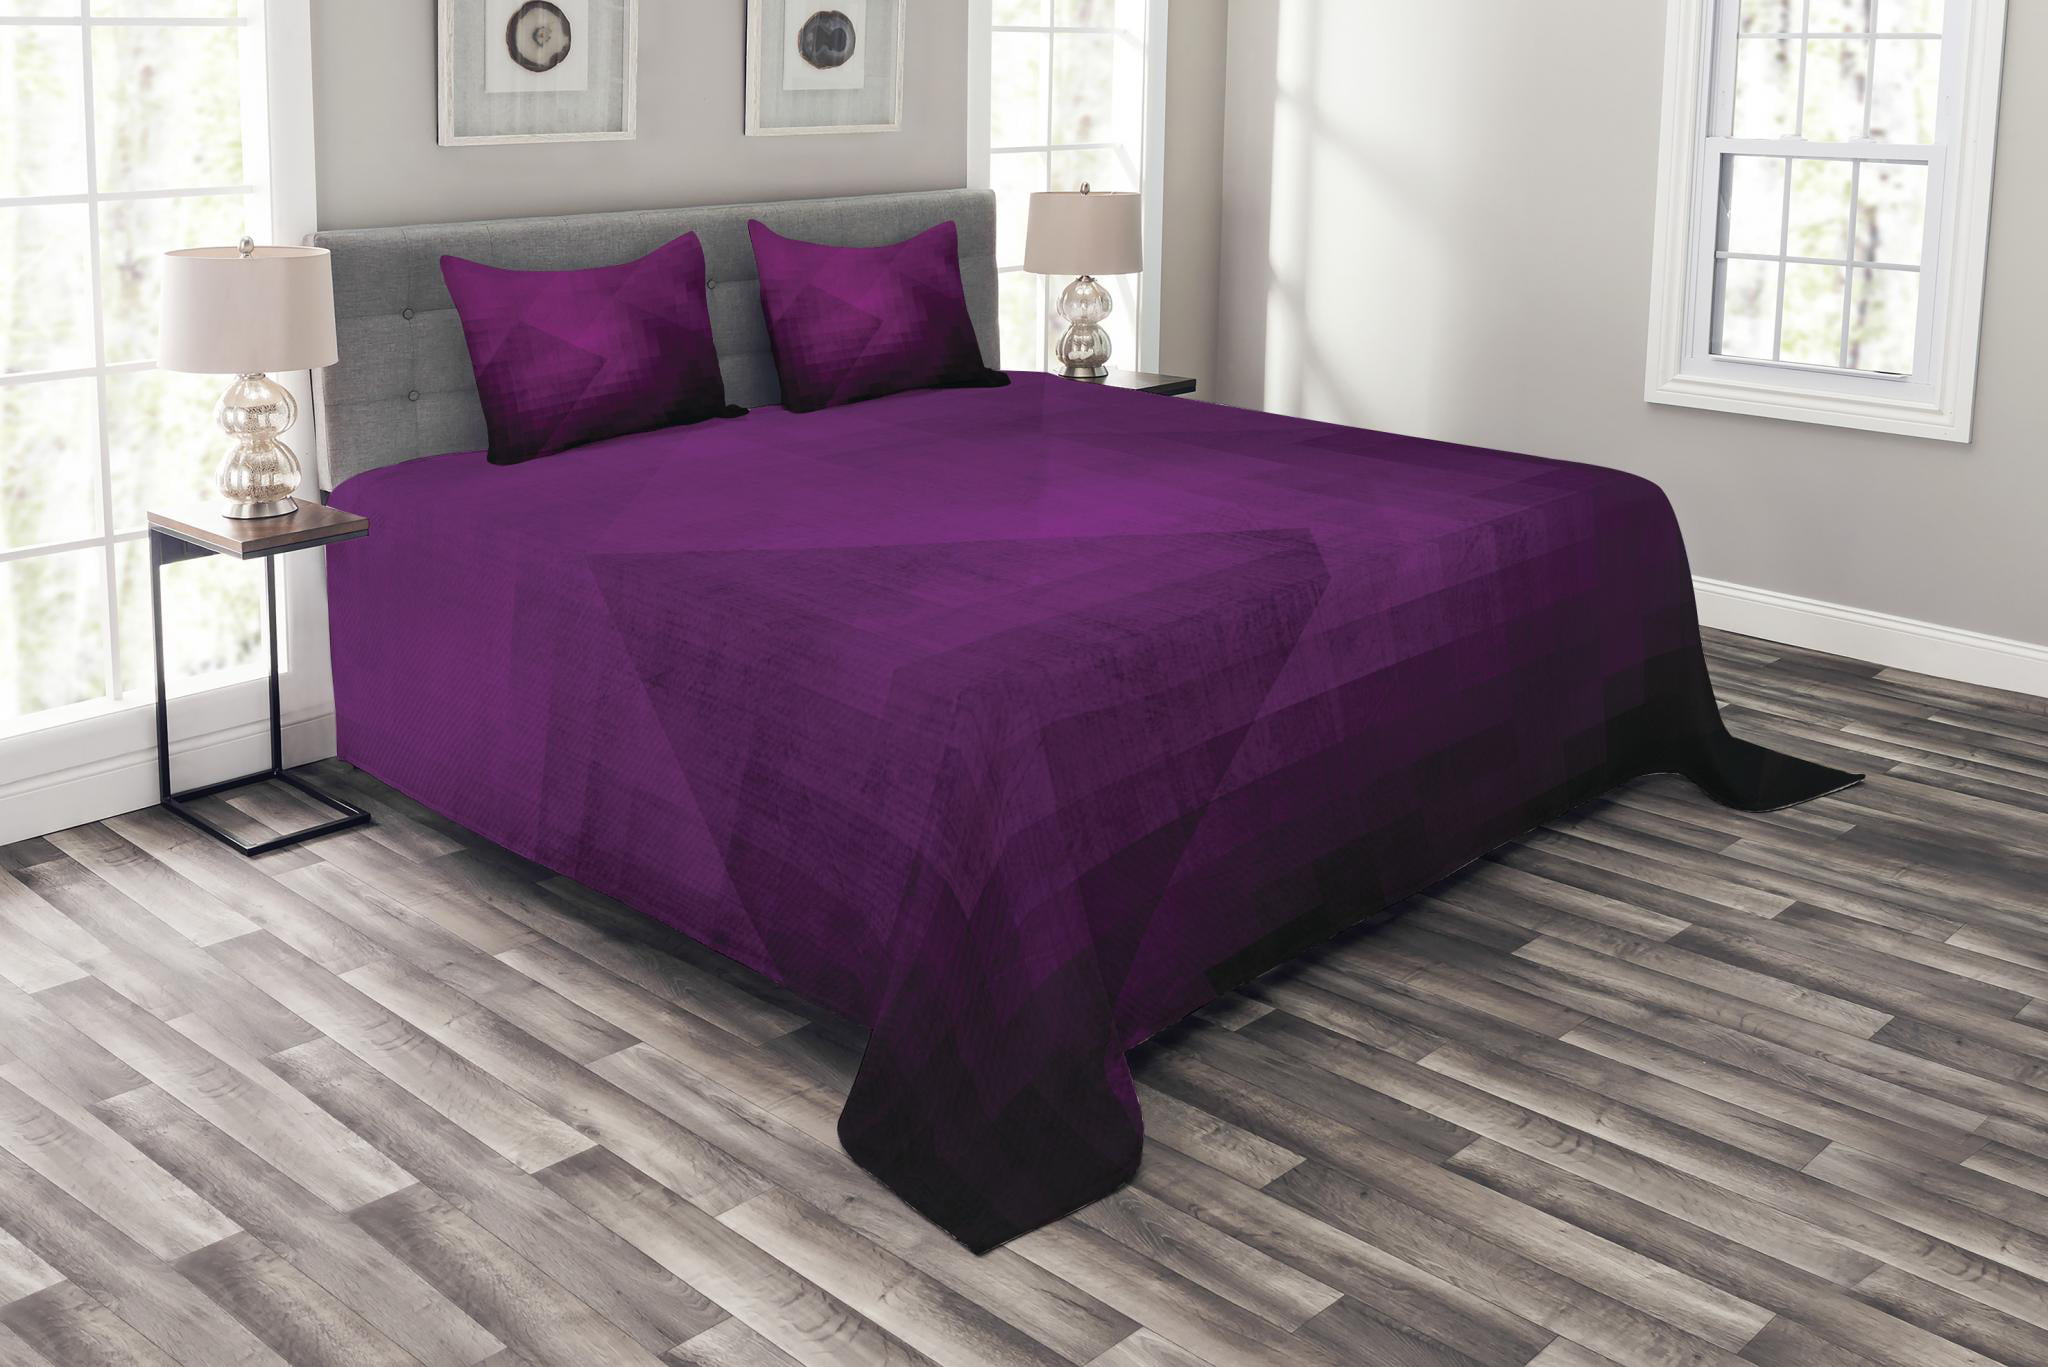 Swirl Design Fashionable Pinsonic n Solid Color Microfiber Quilt Set 